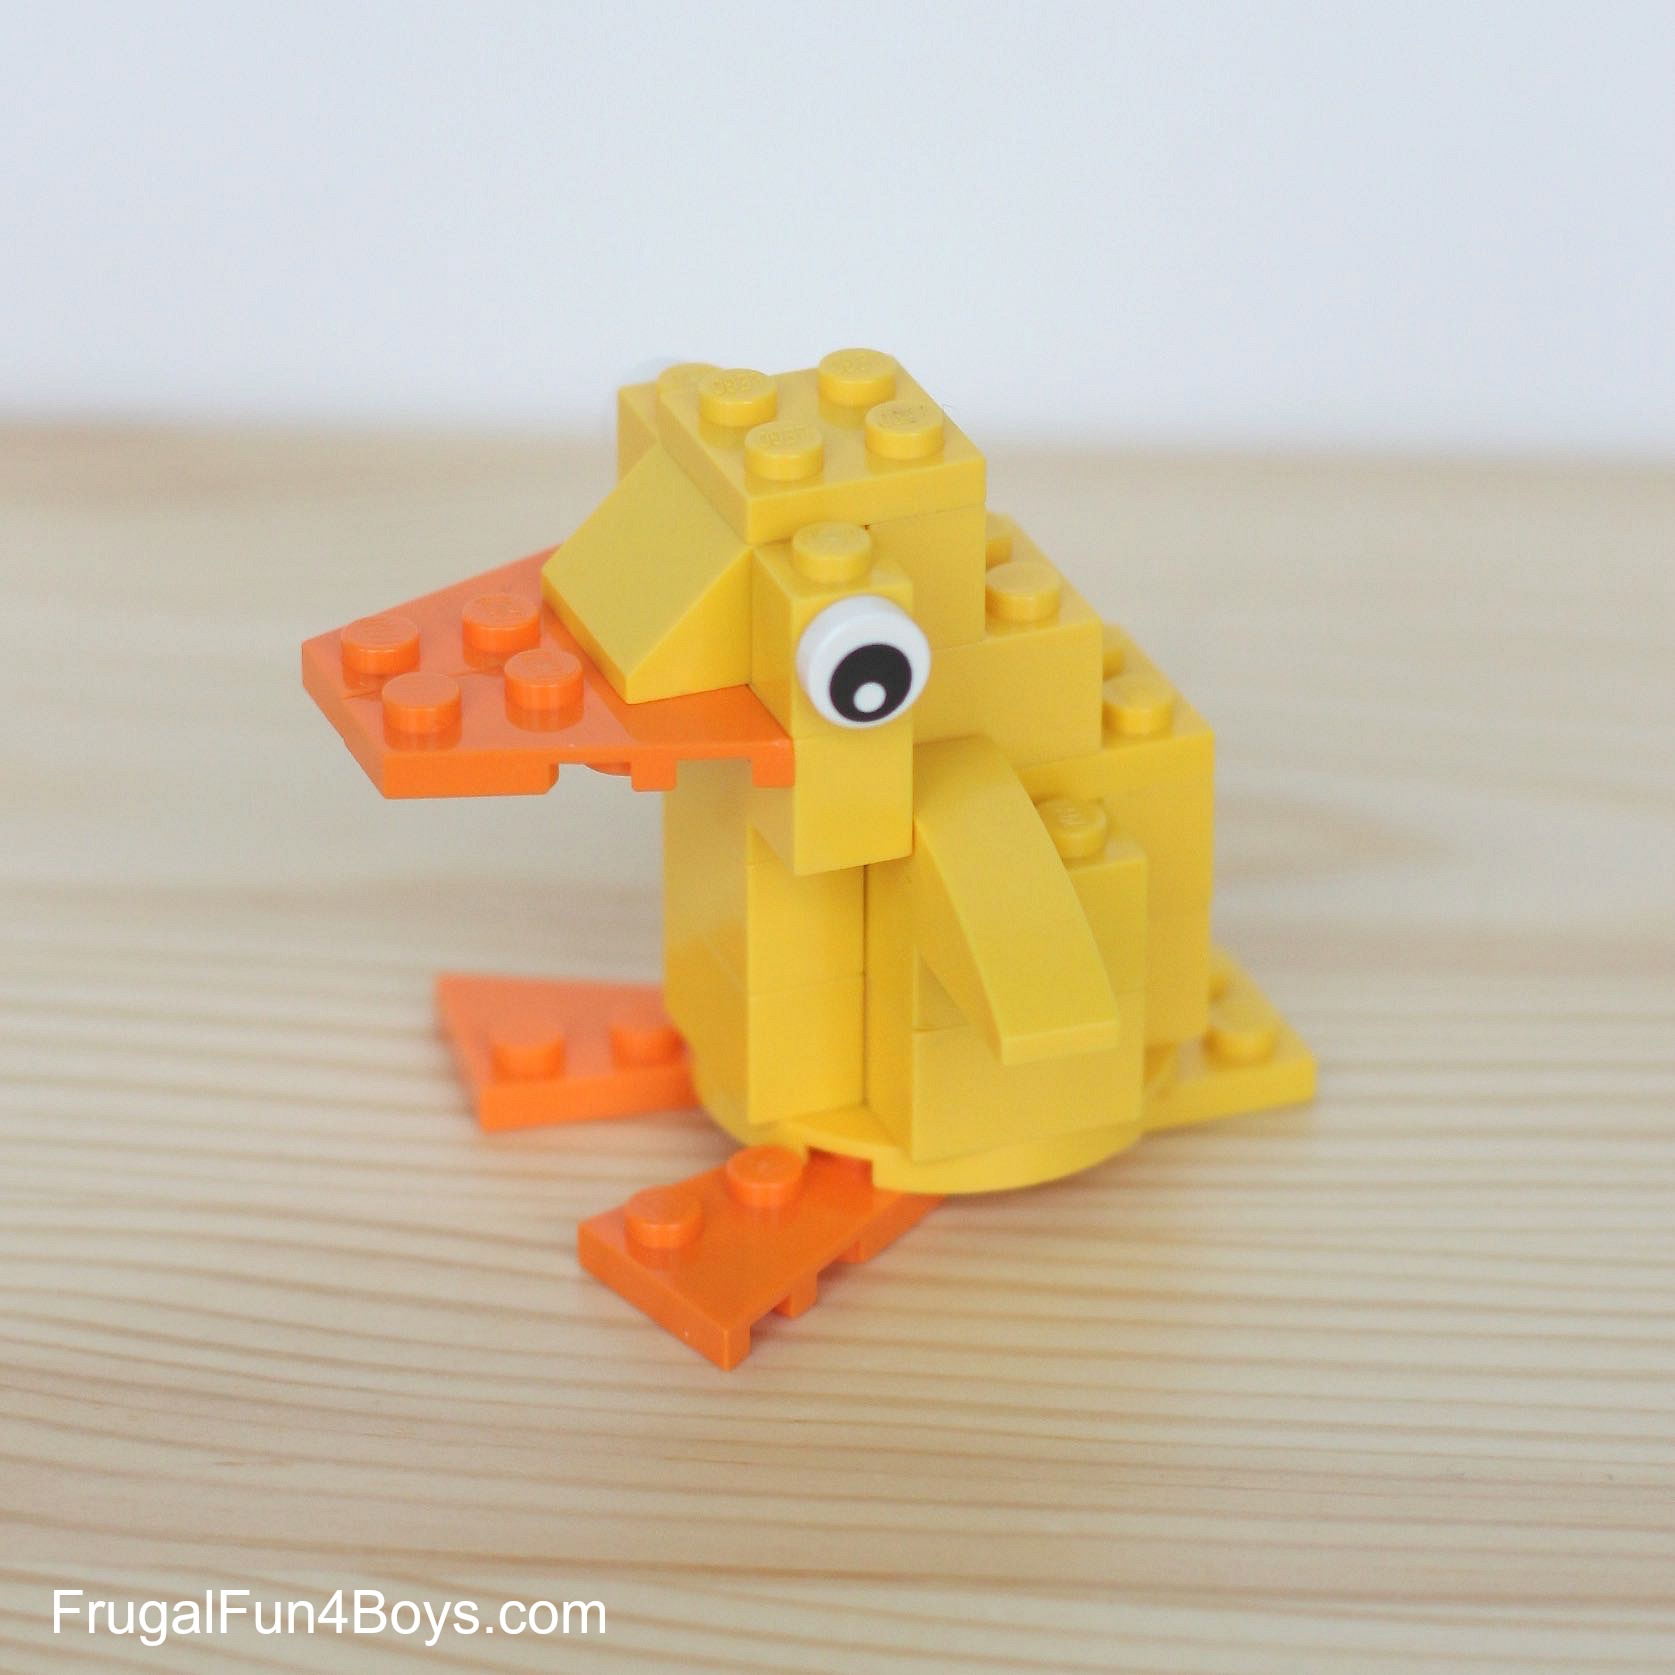 Five Spring Lego Projects to Build